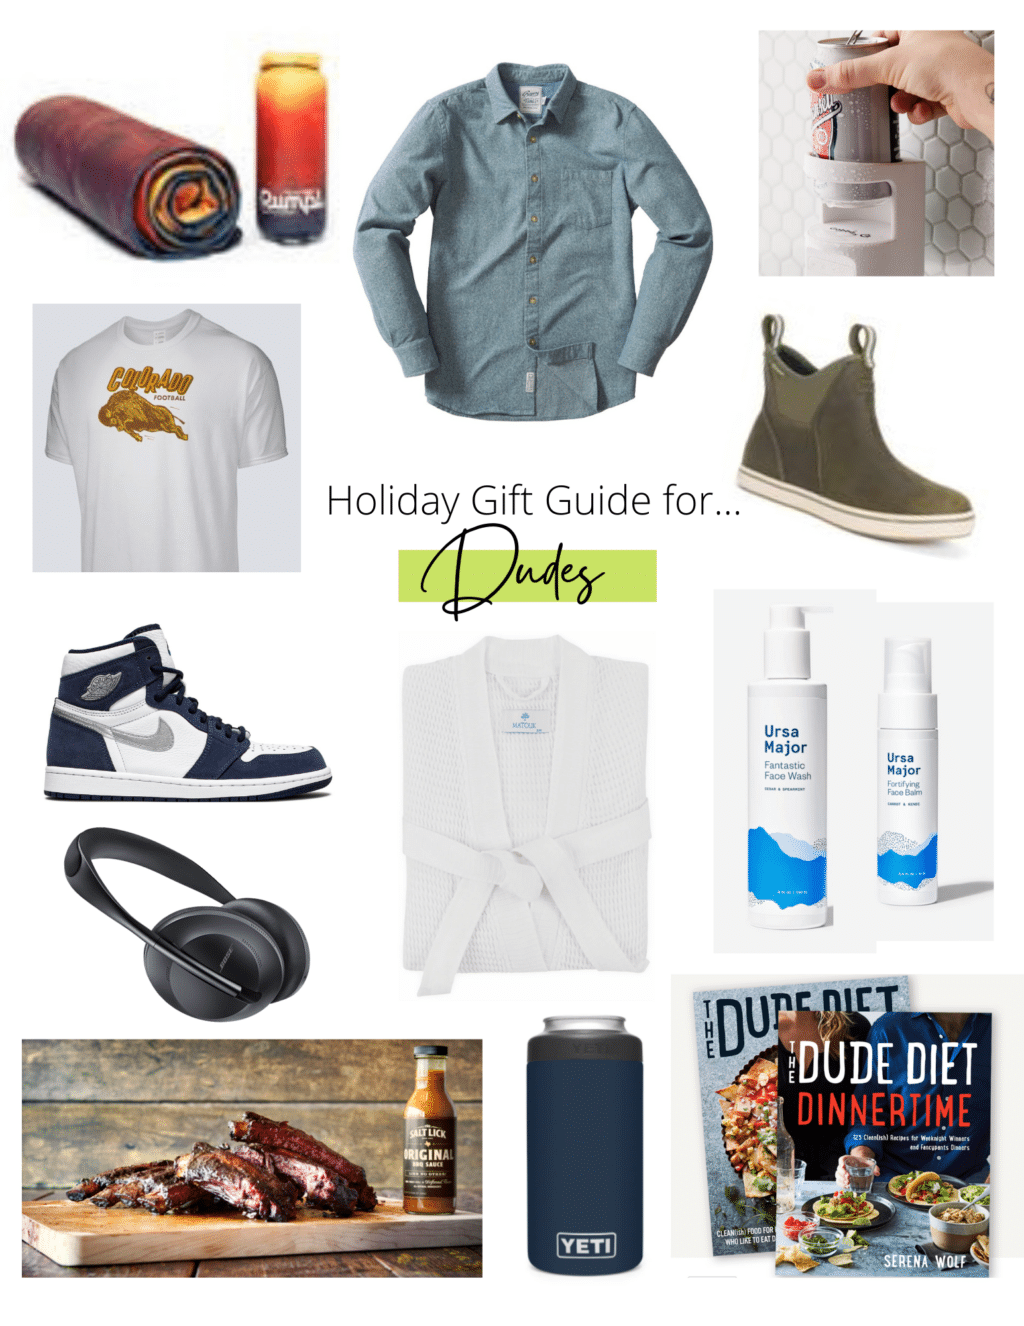 Collage of gift ideas for men.